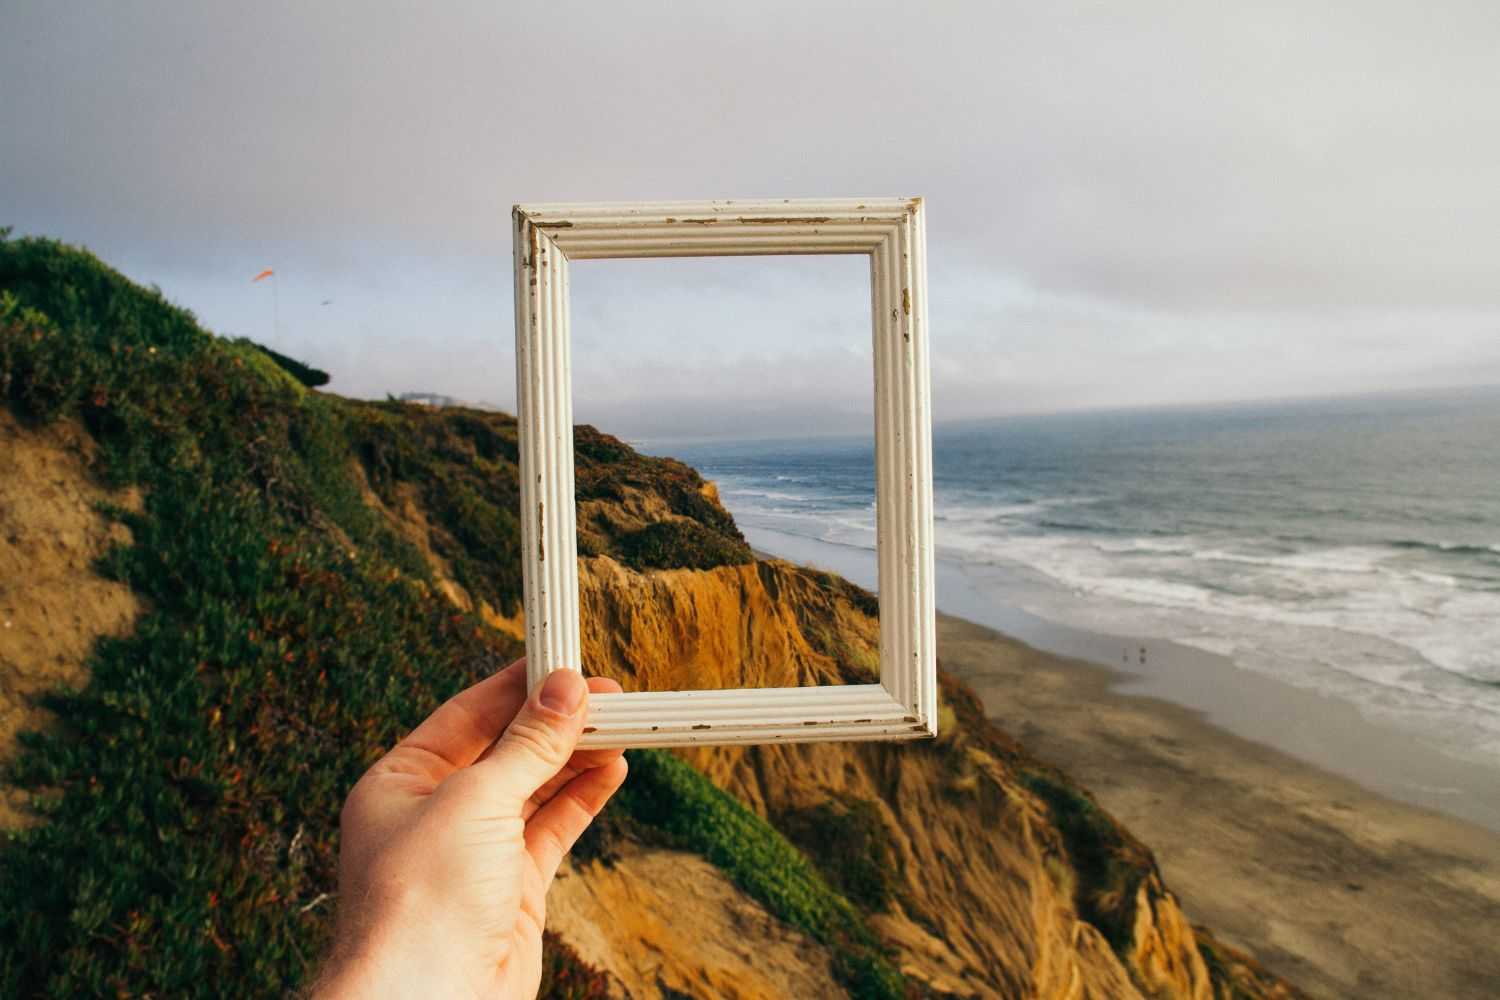 hand holding a photo frame by the sea and stones Photo by Pine Watt on unsplash